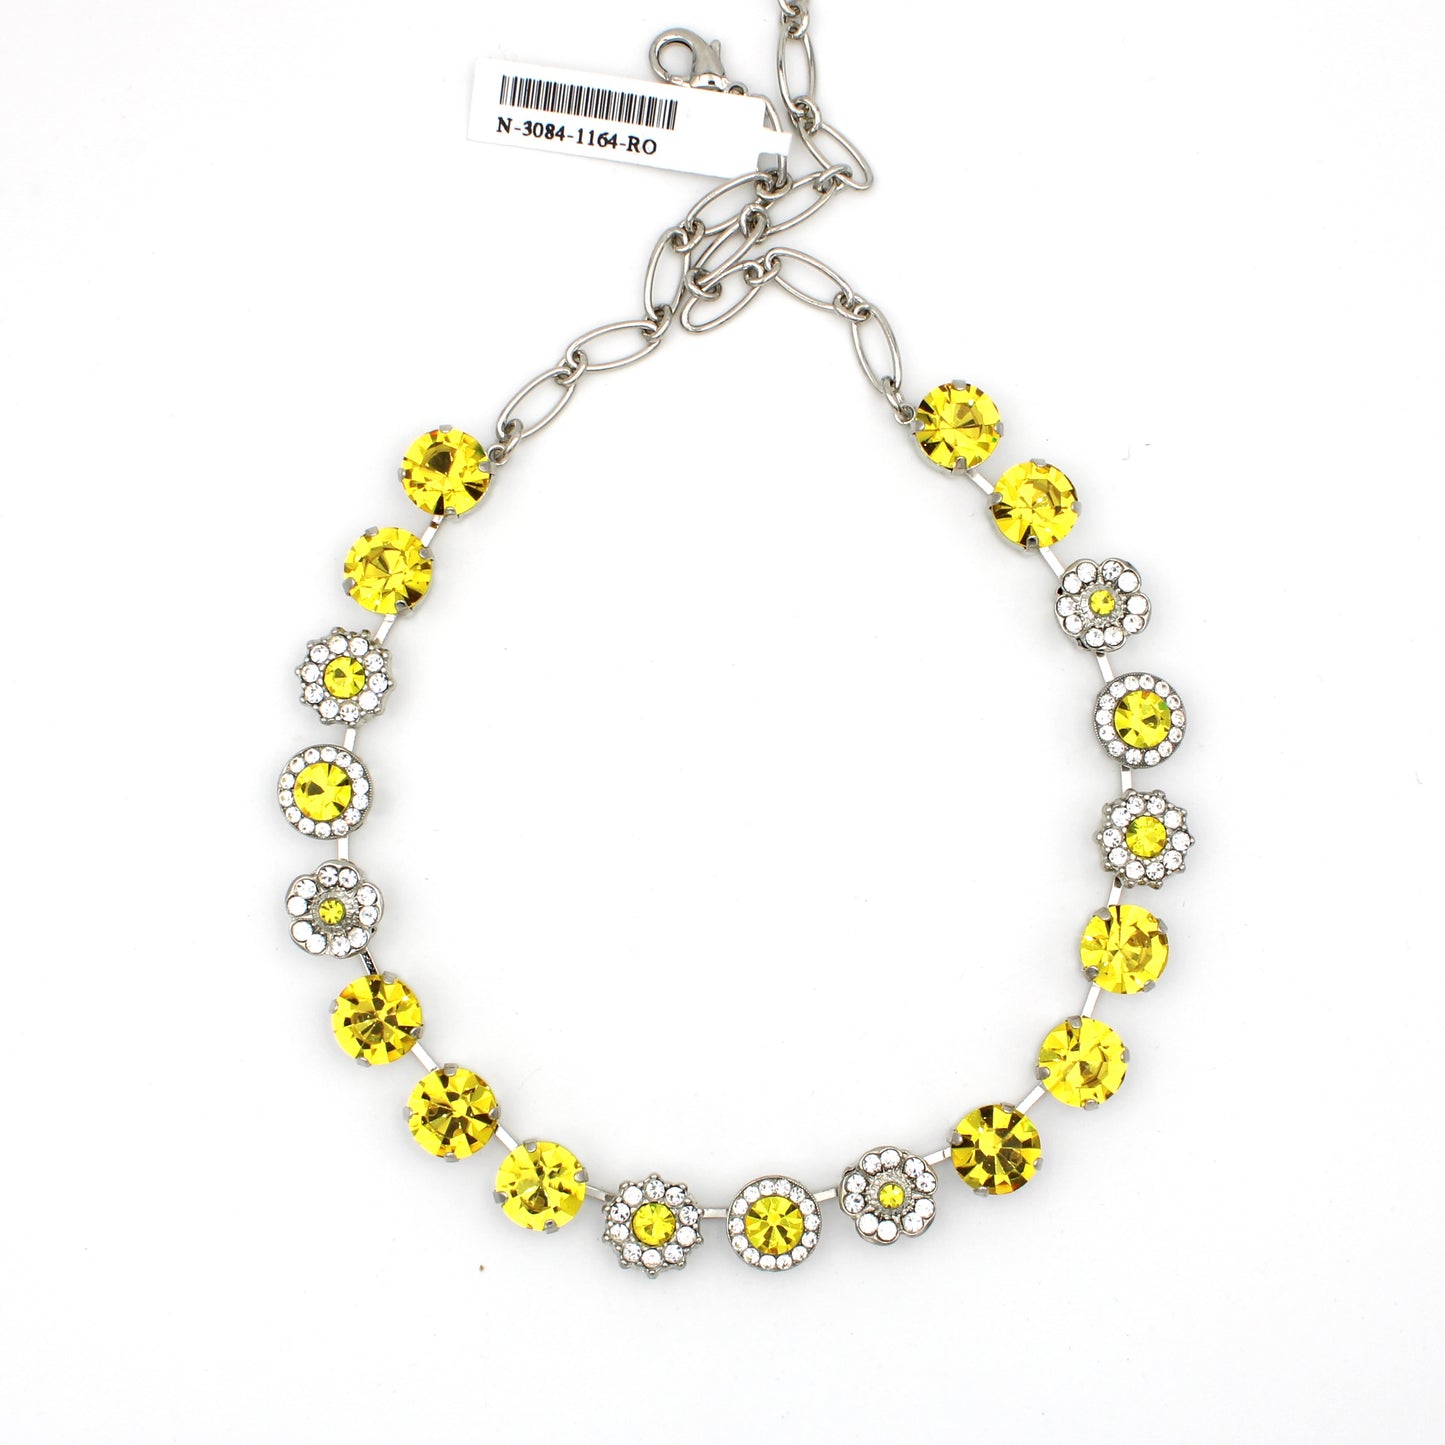 Fields of Gold Lovable Rosette Necklace